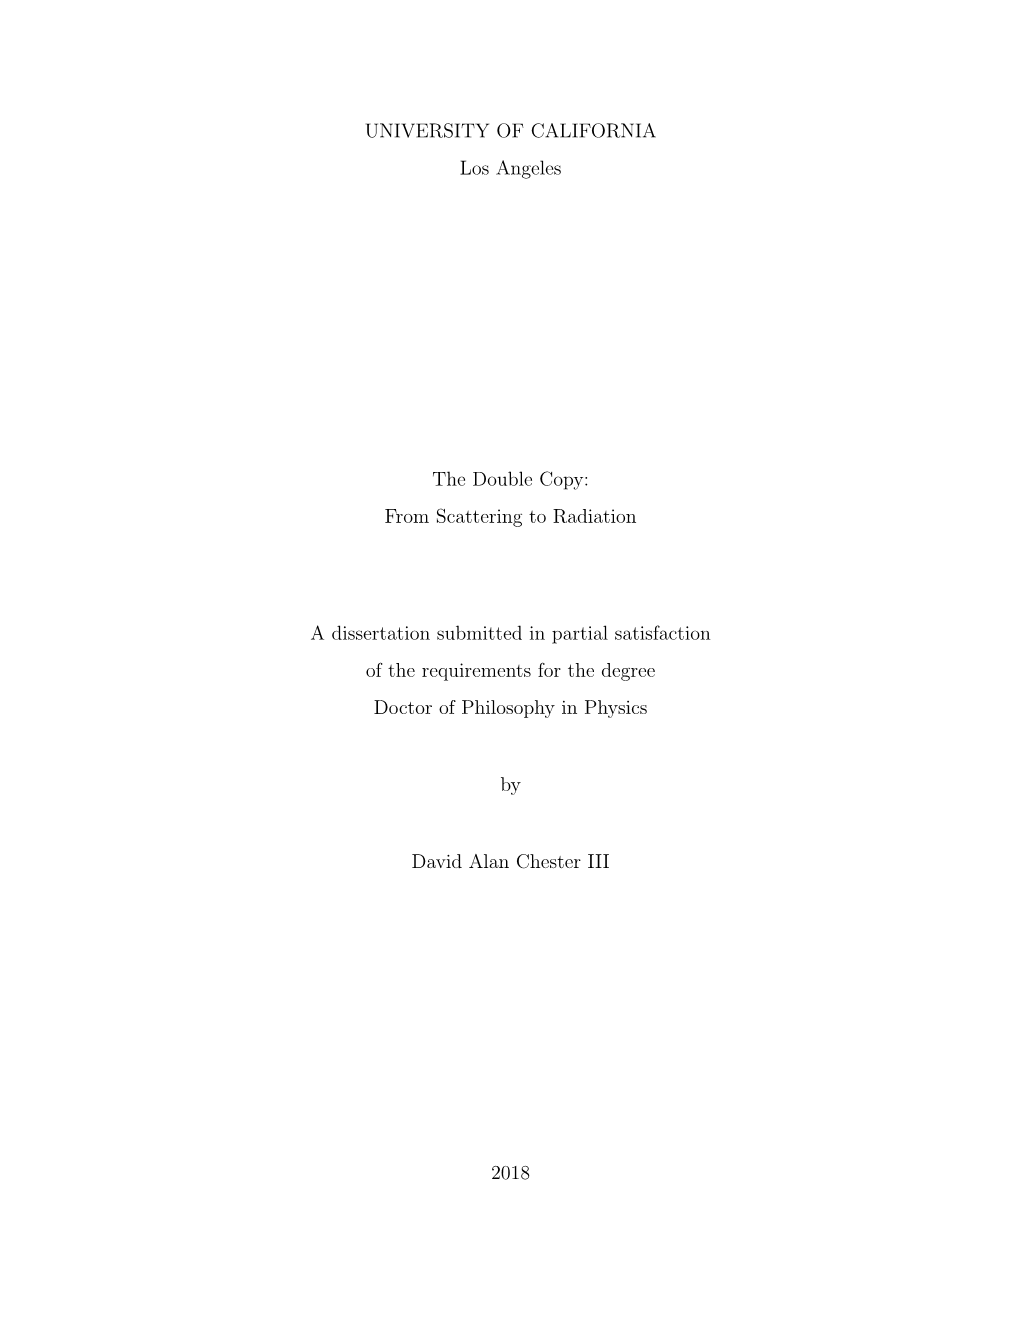 UNIVERSITY of CALIFORNIA Los Angeles the Double Copy: from Scattering to Radiation a Dissertation Submitted in Partial Satisfact